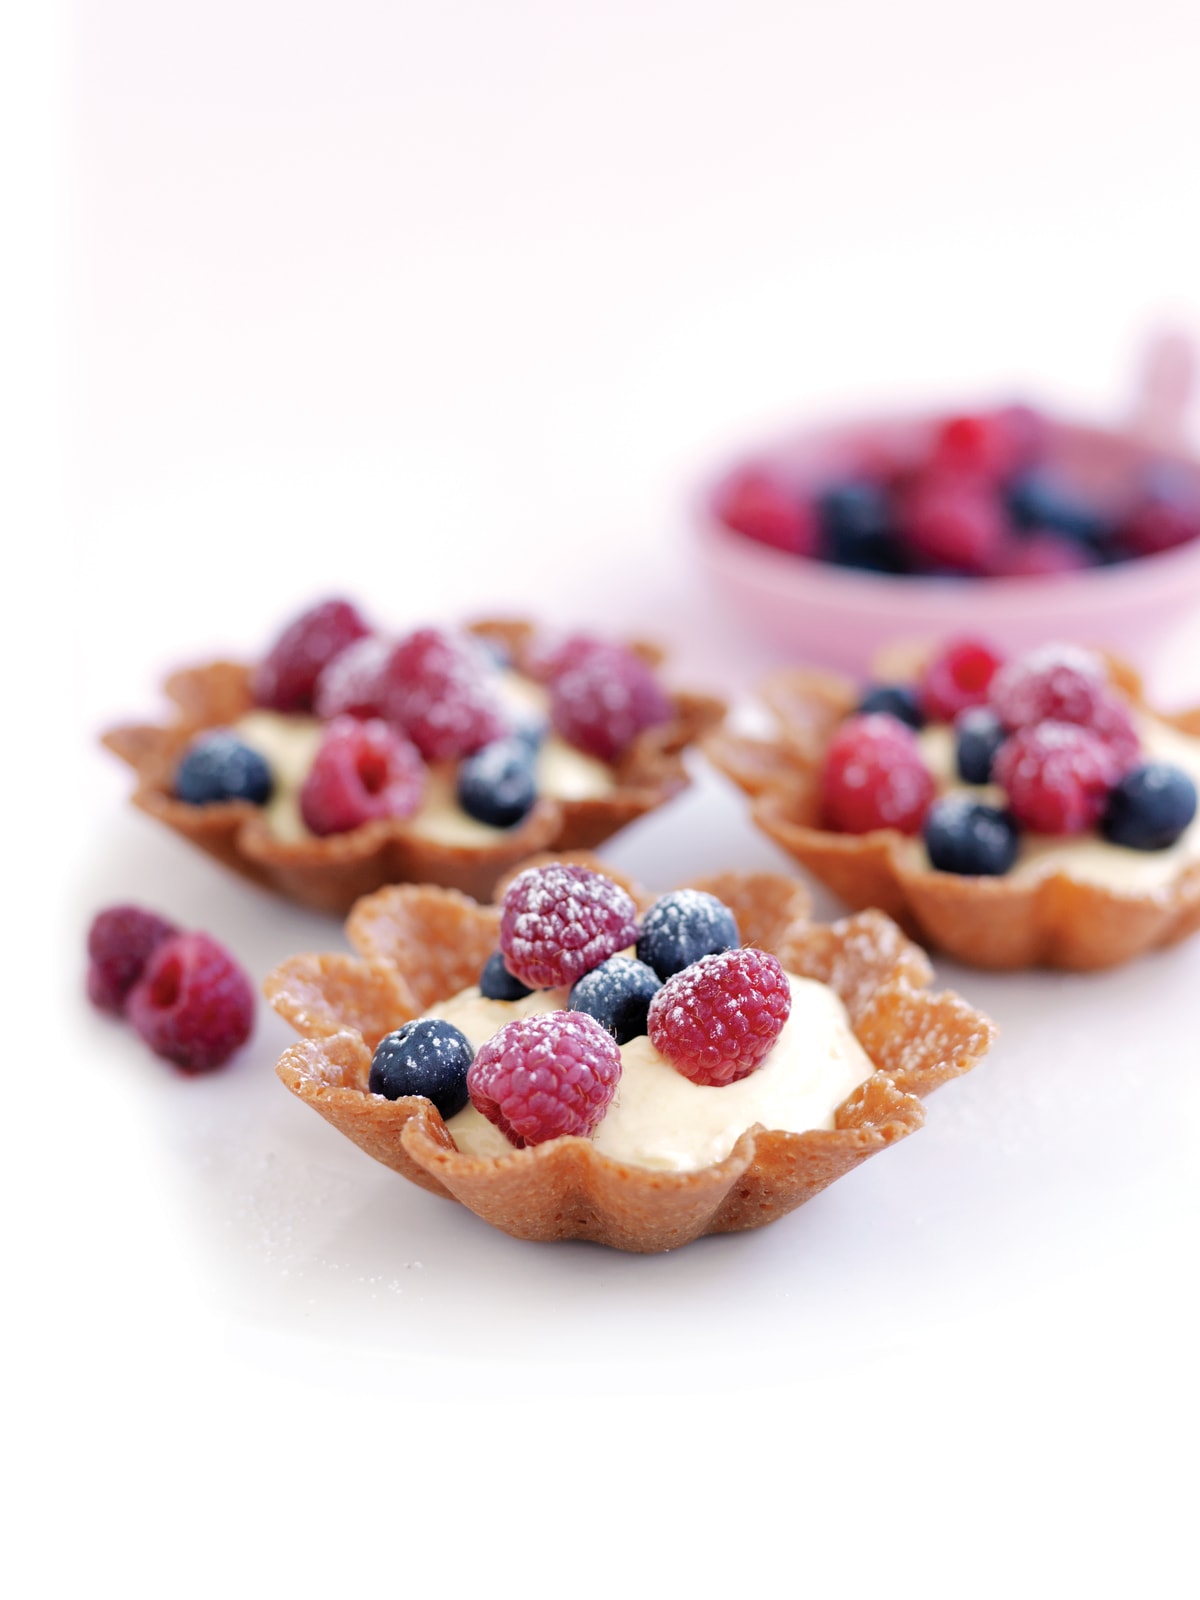 Cheesecake baskets - Healthy Food Guide